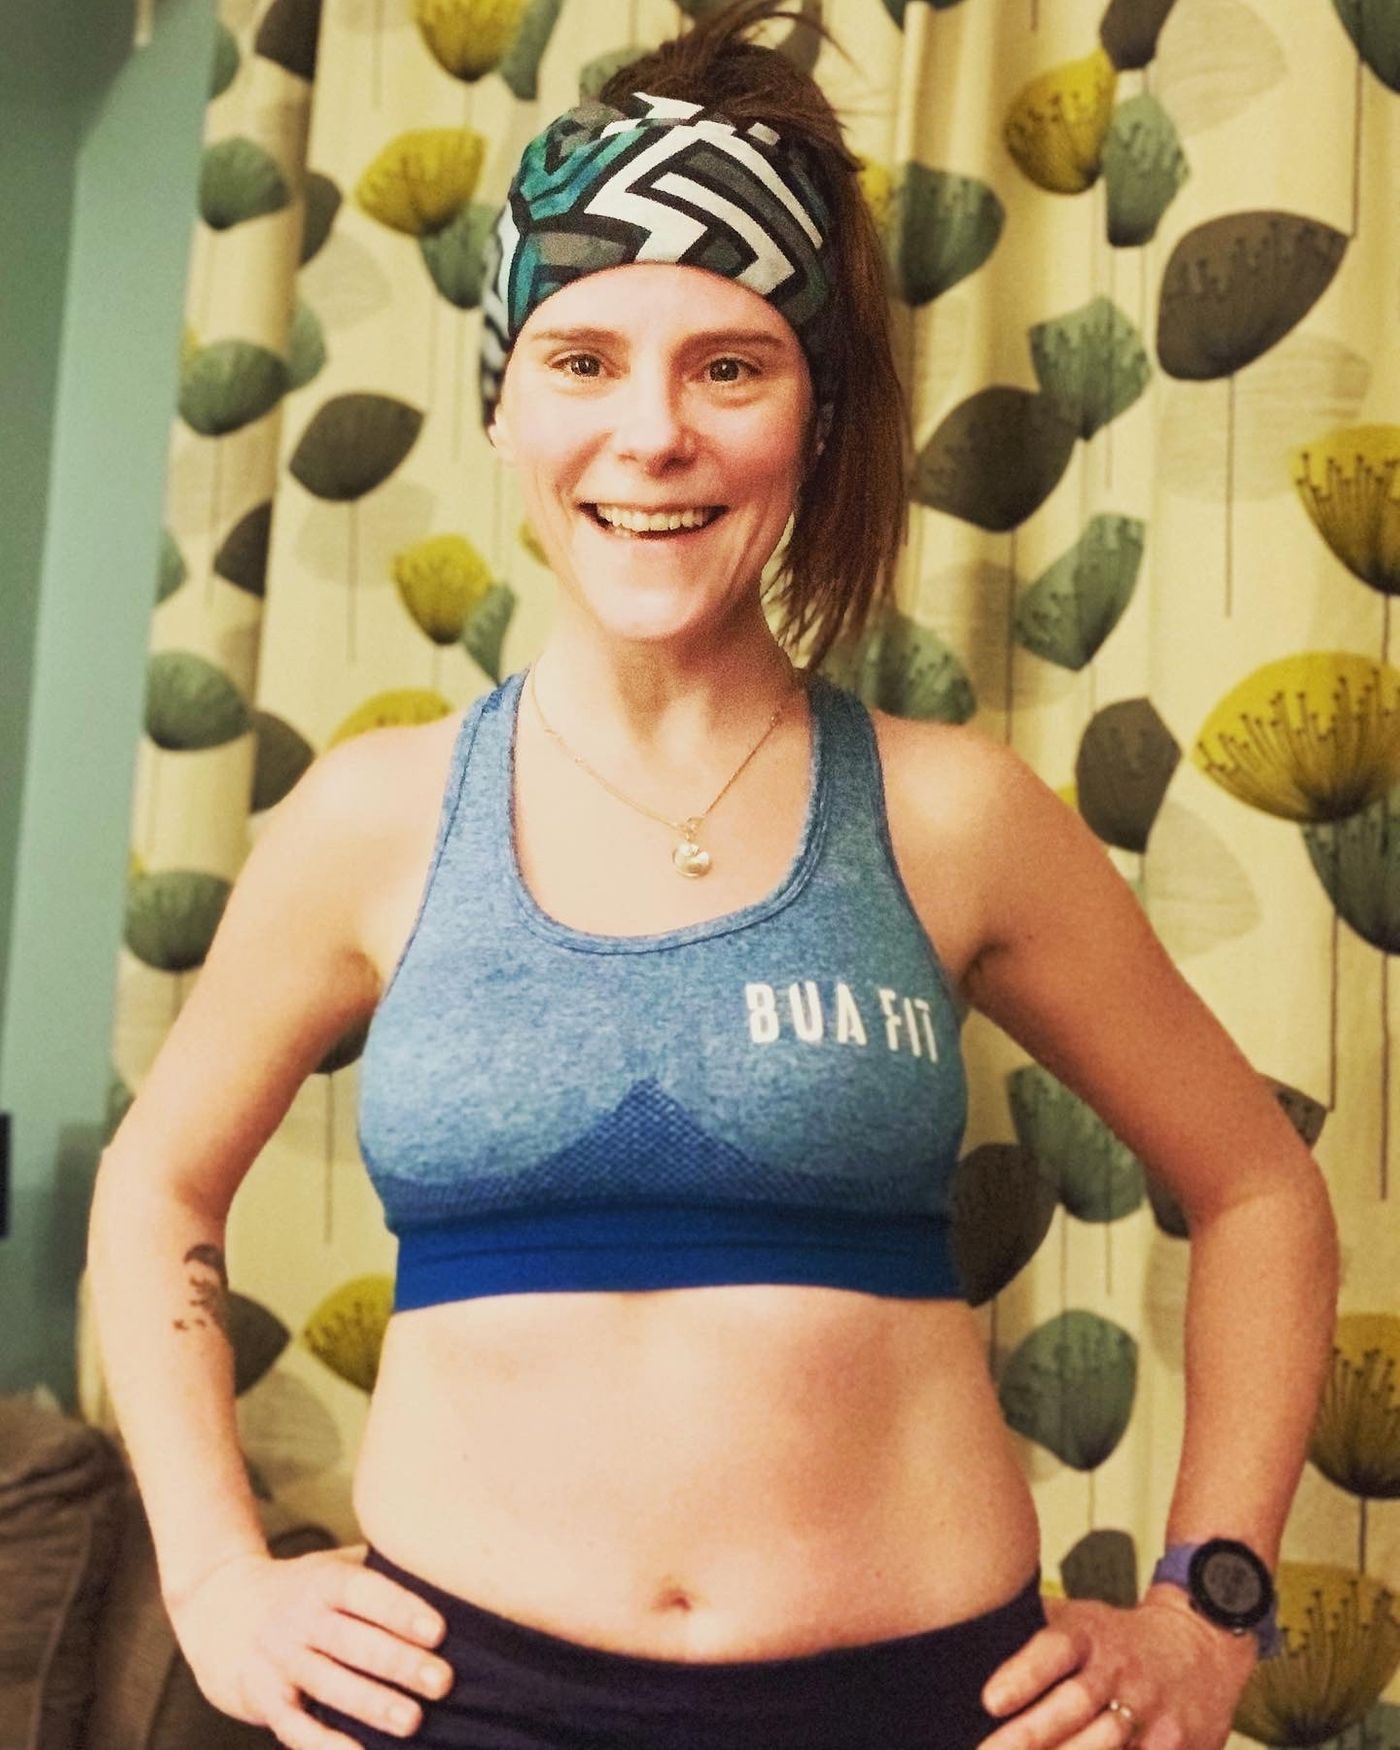 Feeling the @buafitapp ❤️ love with my new #workoutclobber 😍

Needed core & booty blast with Sarah today. New workout clobber always helps! Thanks BuaFit crew, it’s lush 🥰
#lockdownrunner #fitnessgoals #runninggoals #girlswhorun #workoutclobber #feelingthelove #needtomovemore #core #strength #thisgirlcan #mentalhealth #imissgroupexercise #enoughnow #thankcrunchieforbuafit 